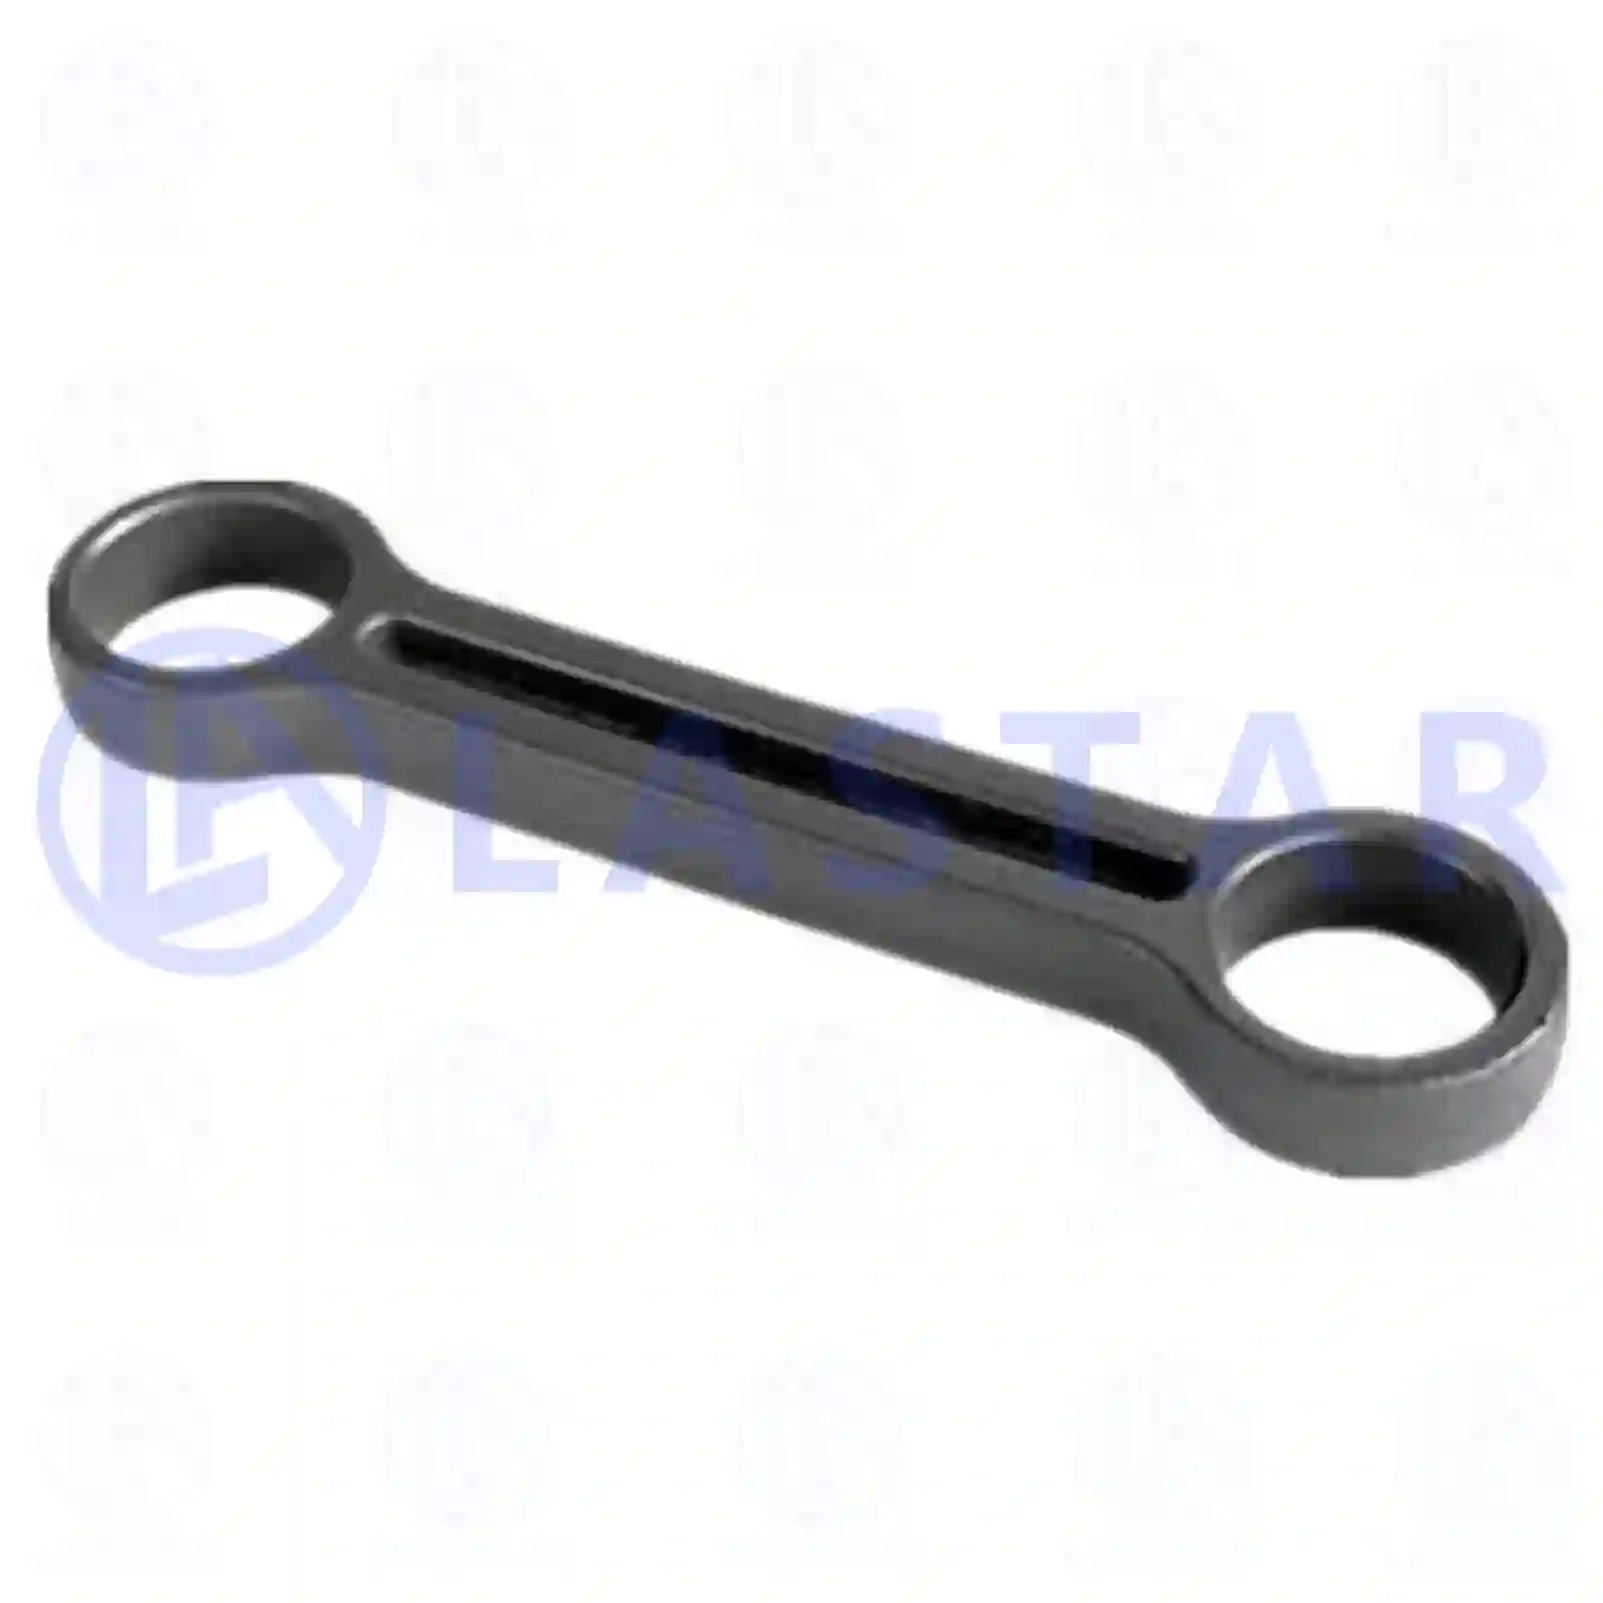 Connecting rod, stabilizer, 77727899, 9483260647, 94832 ||  77727899 Lastar Spare Part | Truck Spare Parts, Auotomotive Spare Parts Connecting rod, stabilizer, 77727899, 9483260647, 94832 ||  77727899 Lastar Spare Part | Truck Spare Parts, Auotomotive Spare Parts